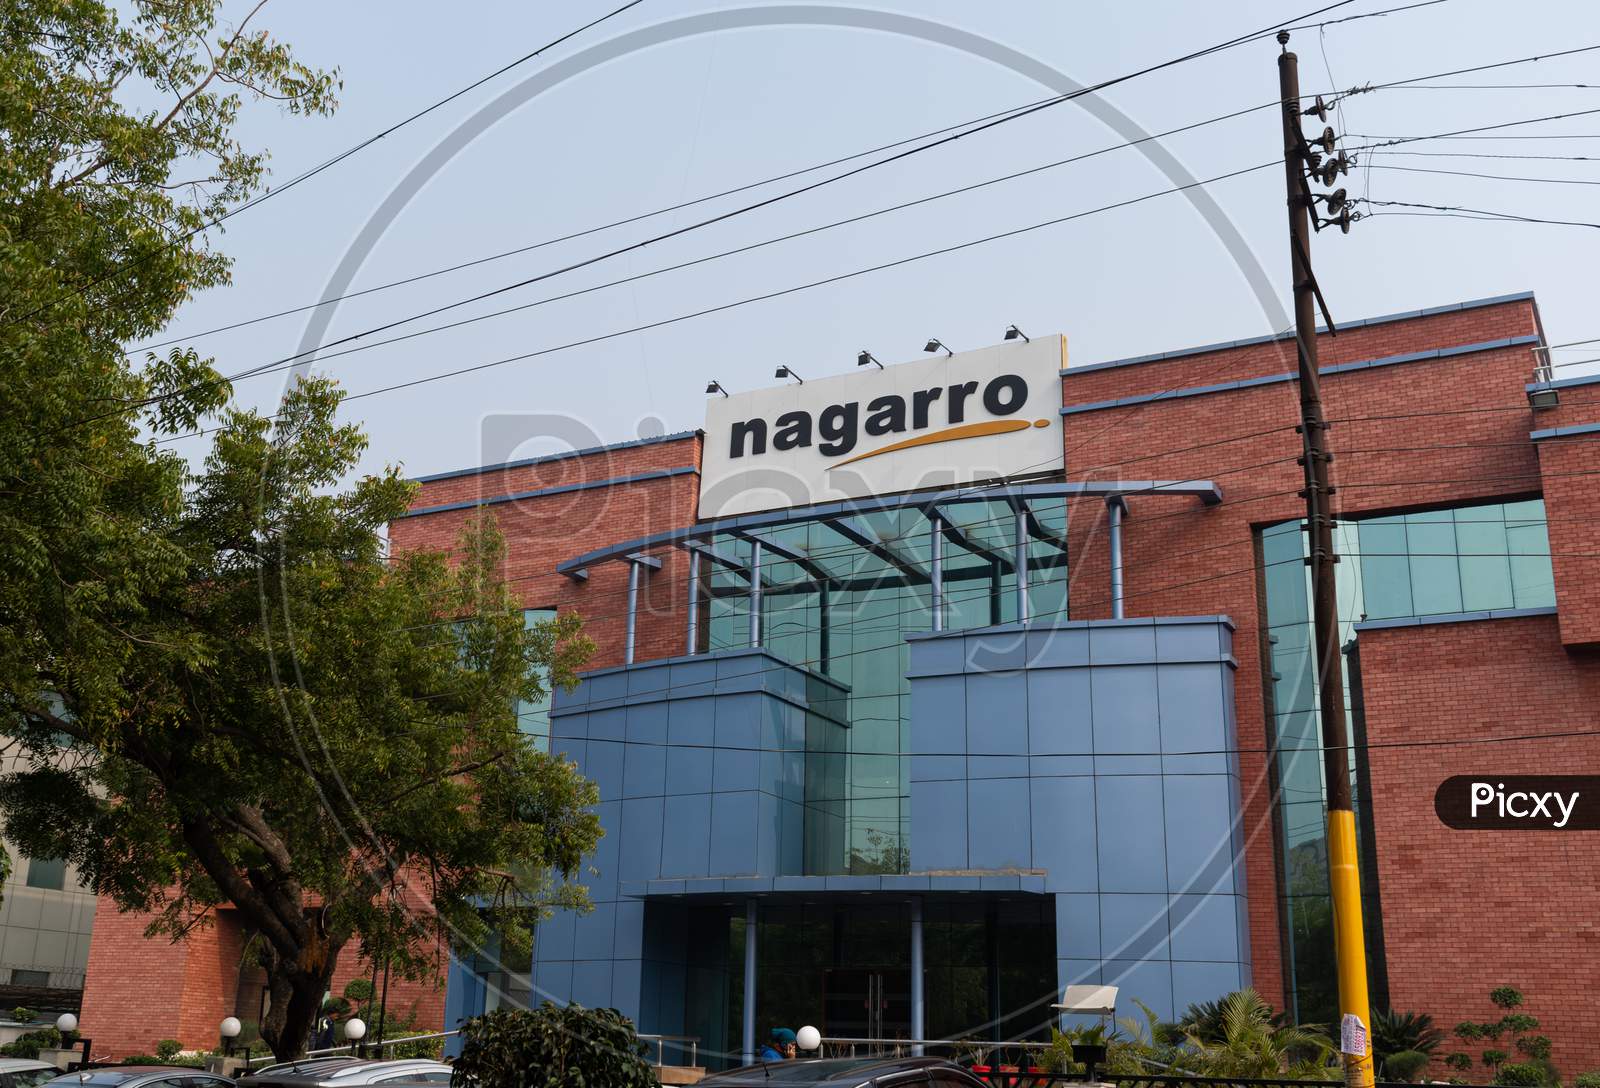 Image of Nagarro IT Consulting & Technology Services office-GR568582-Picxy